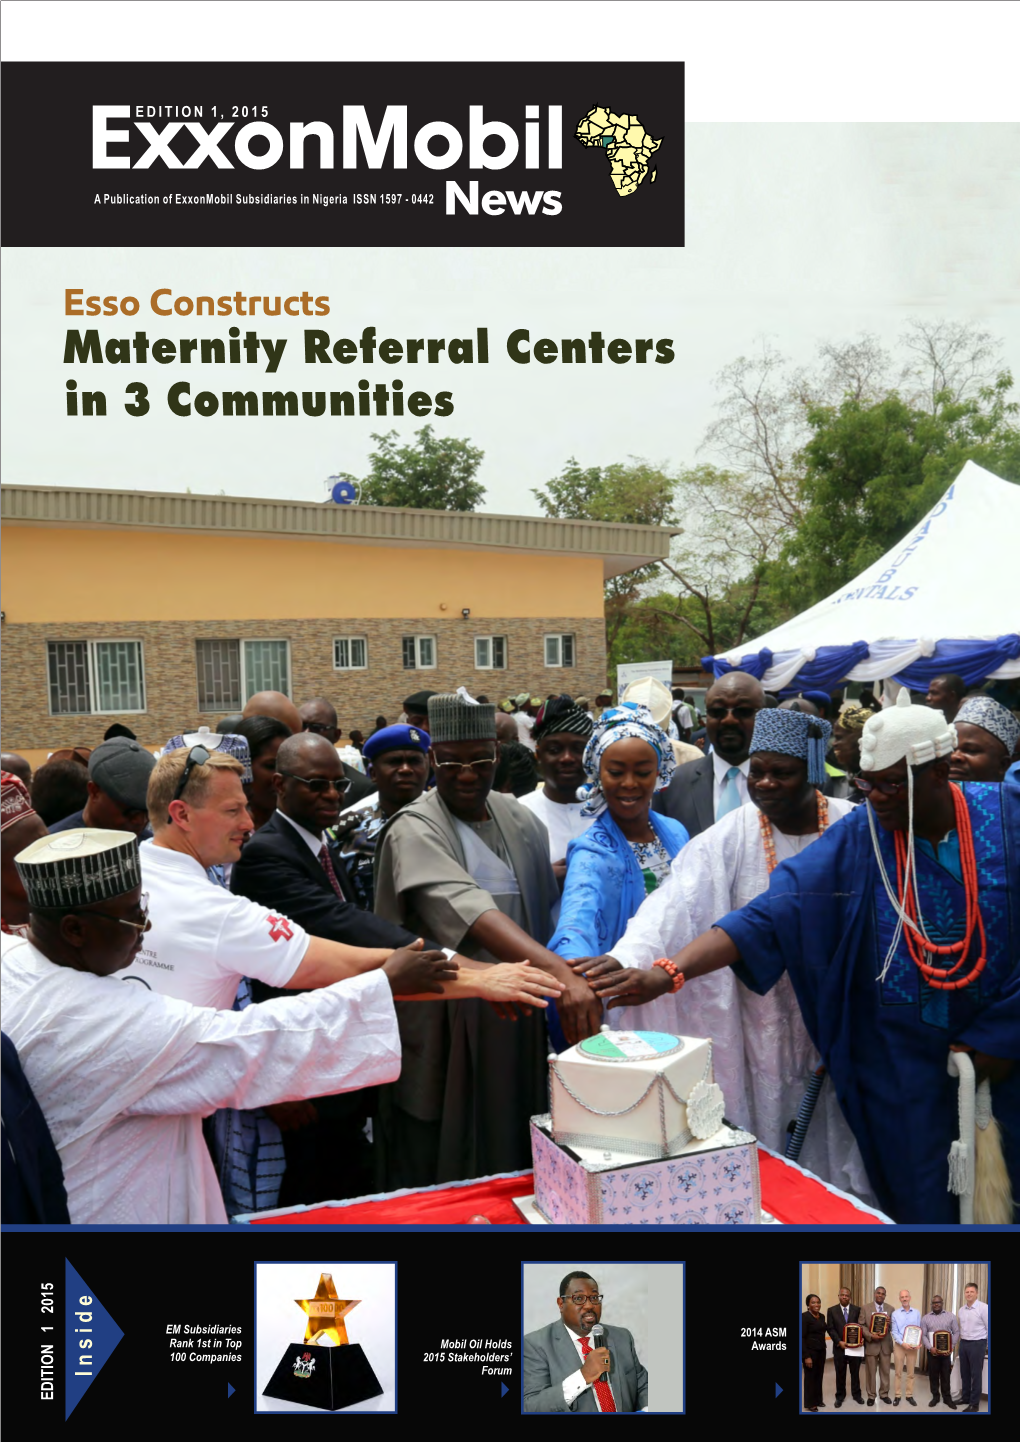 Maternity Referral Centers in 3 Communities